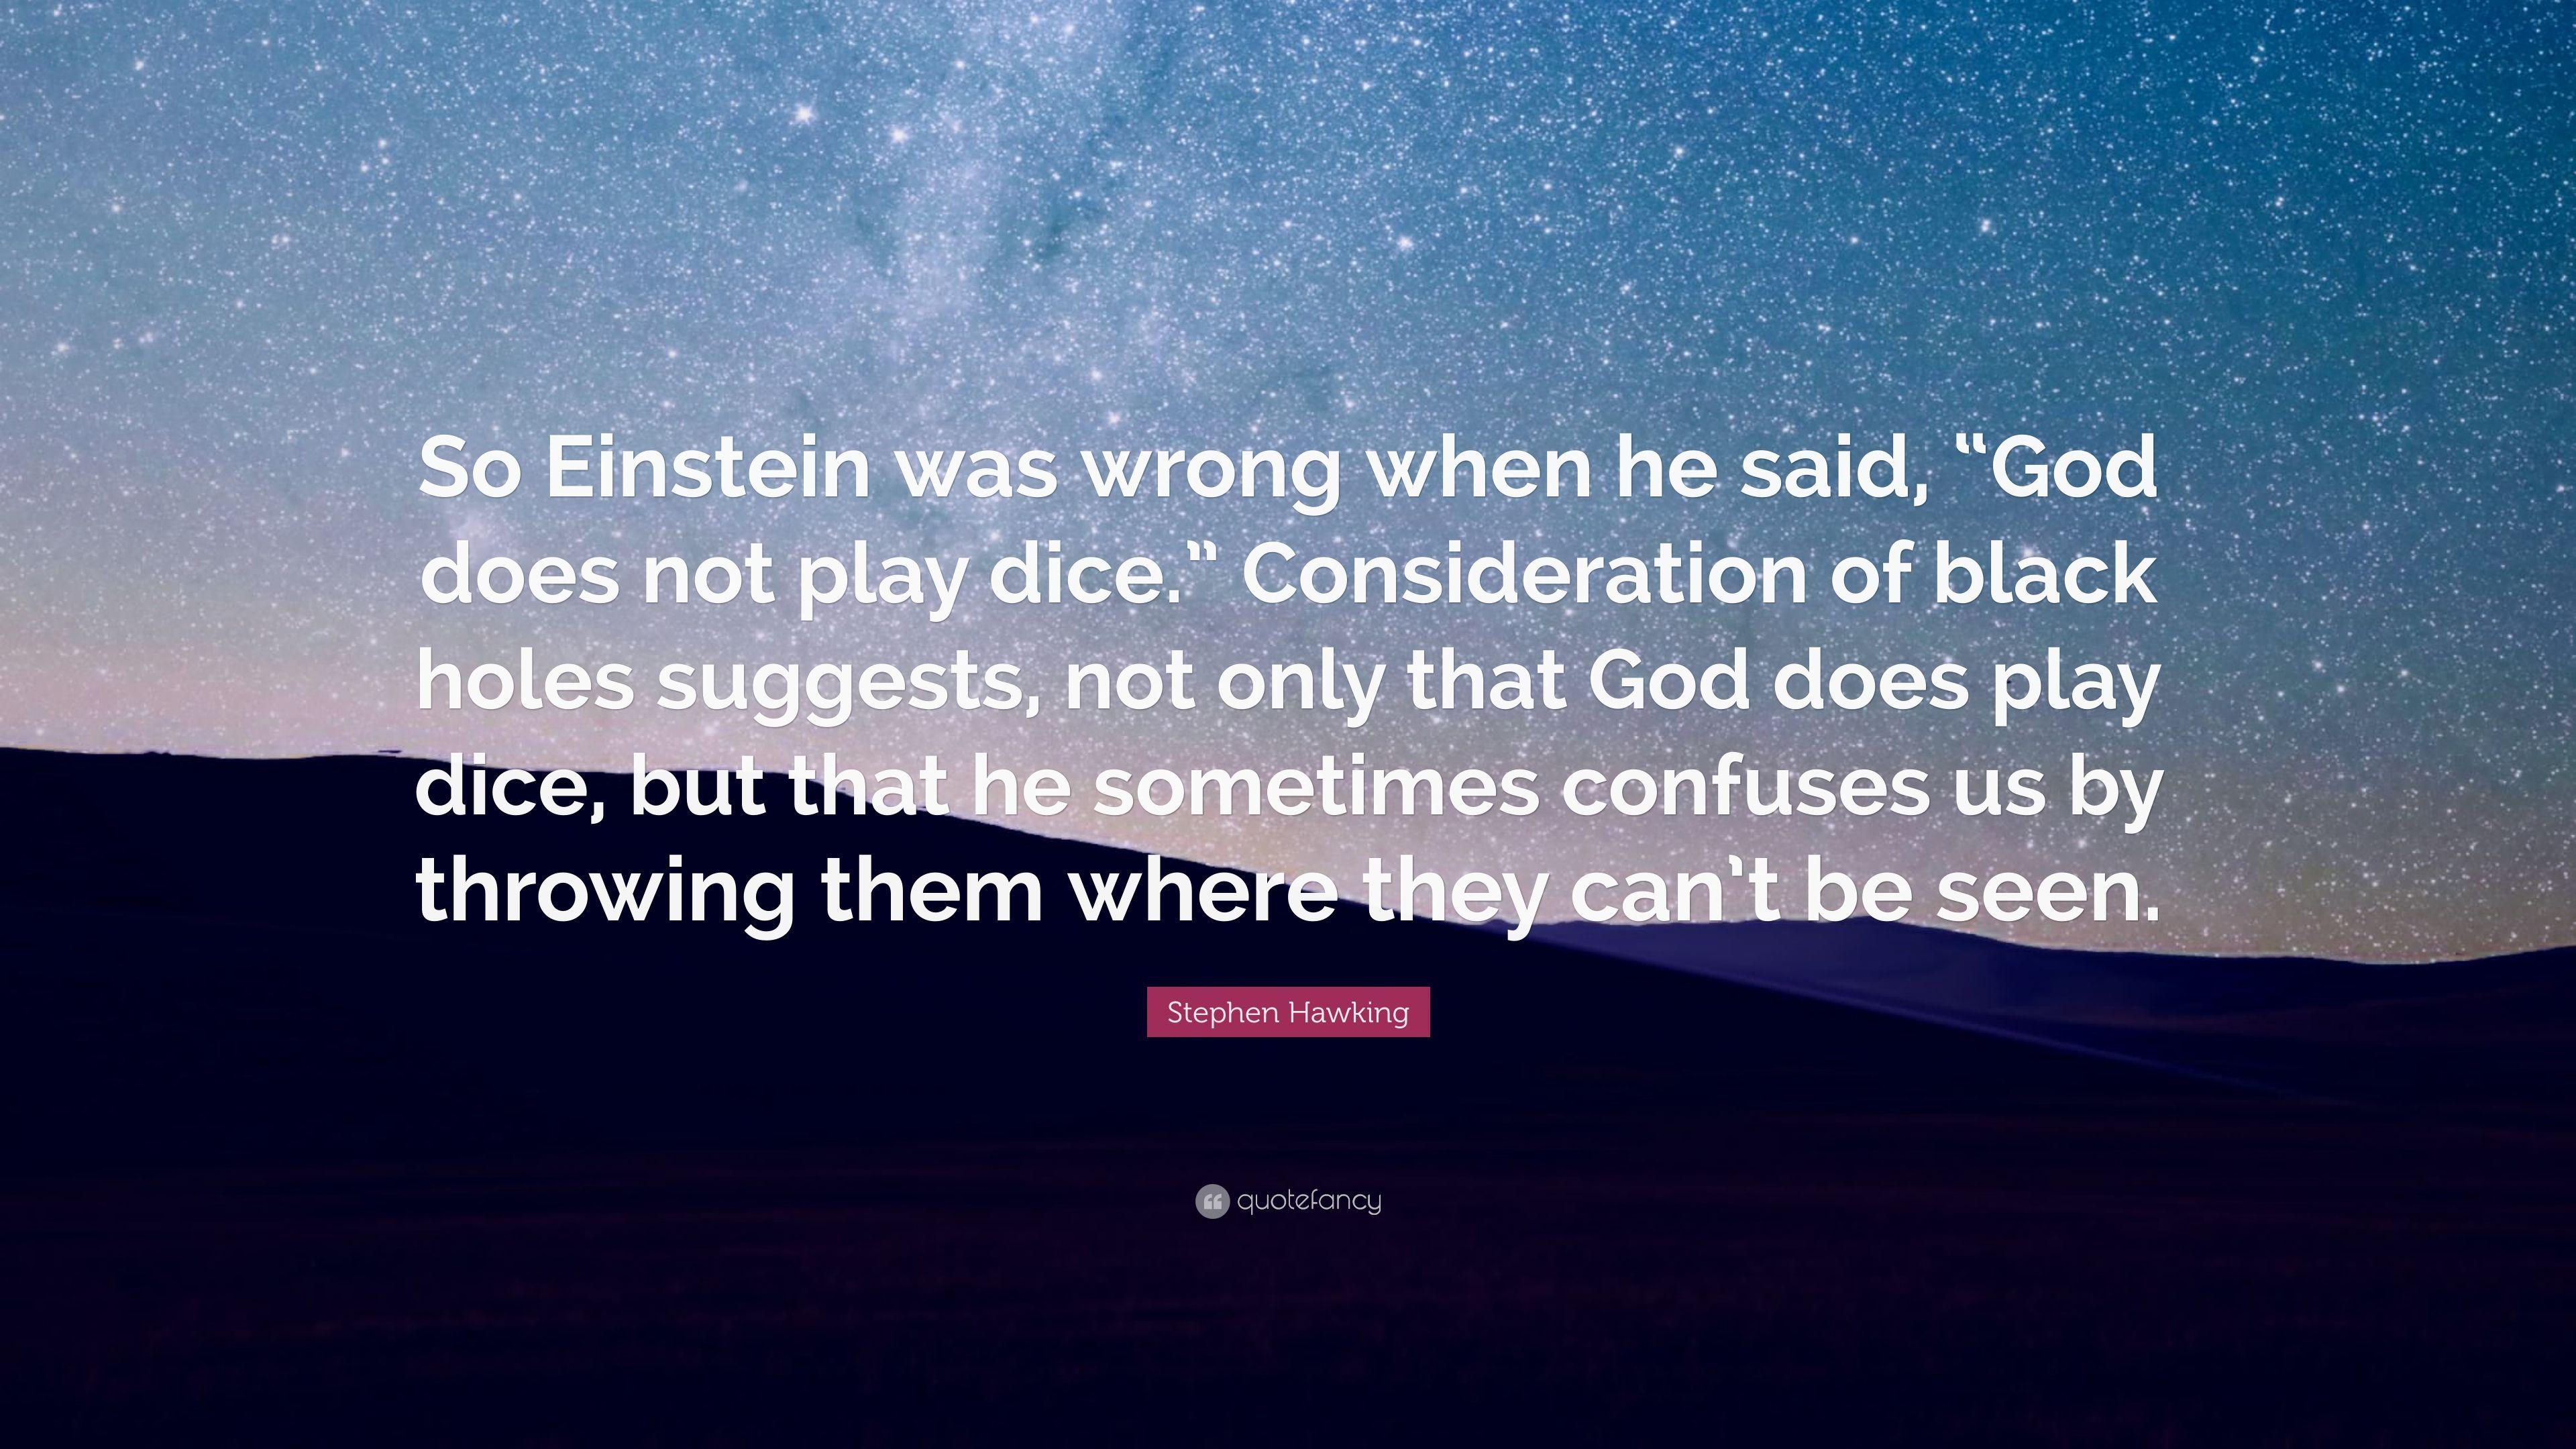 Stephen Hawking Quote: “So Einstein was wrong when he said, “God